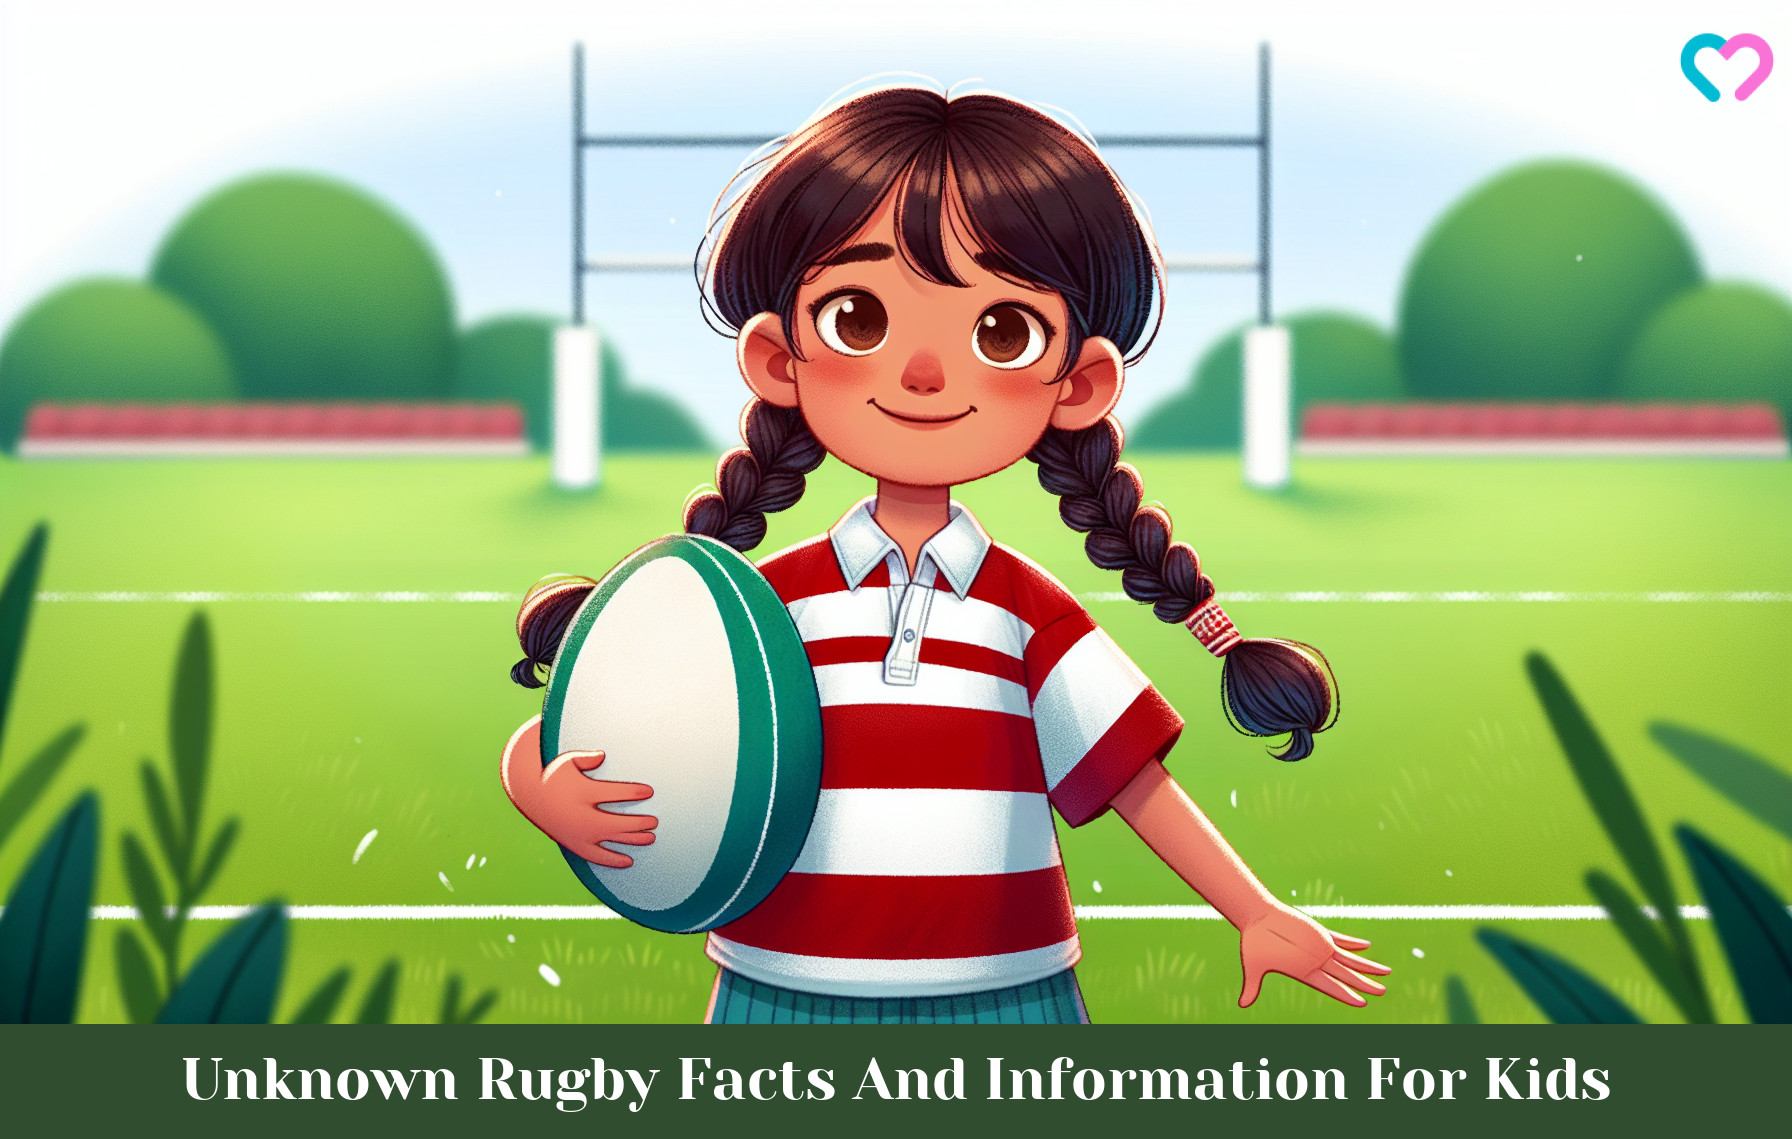 Rugby Facts For Kids_illustration